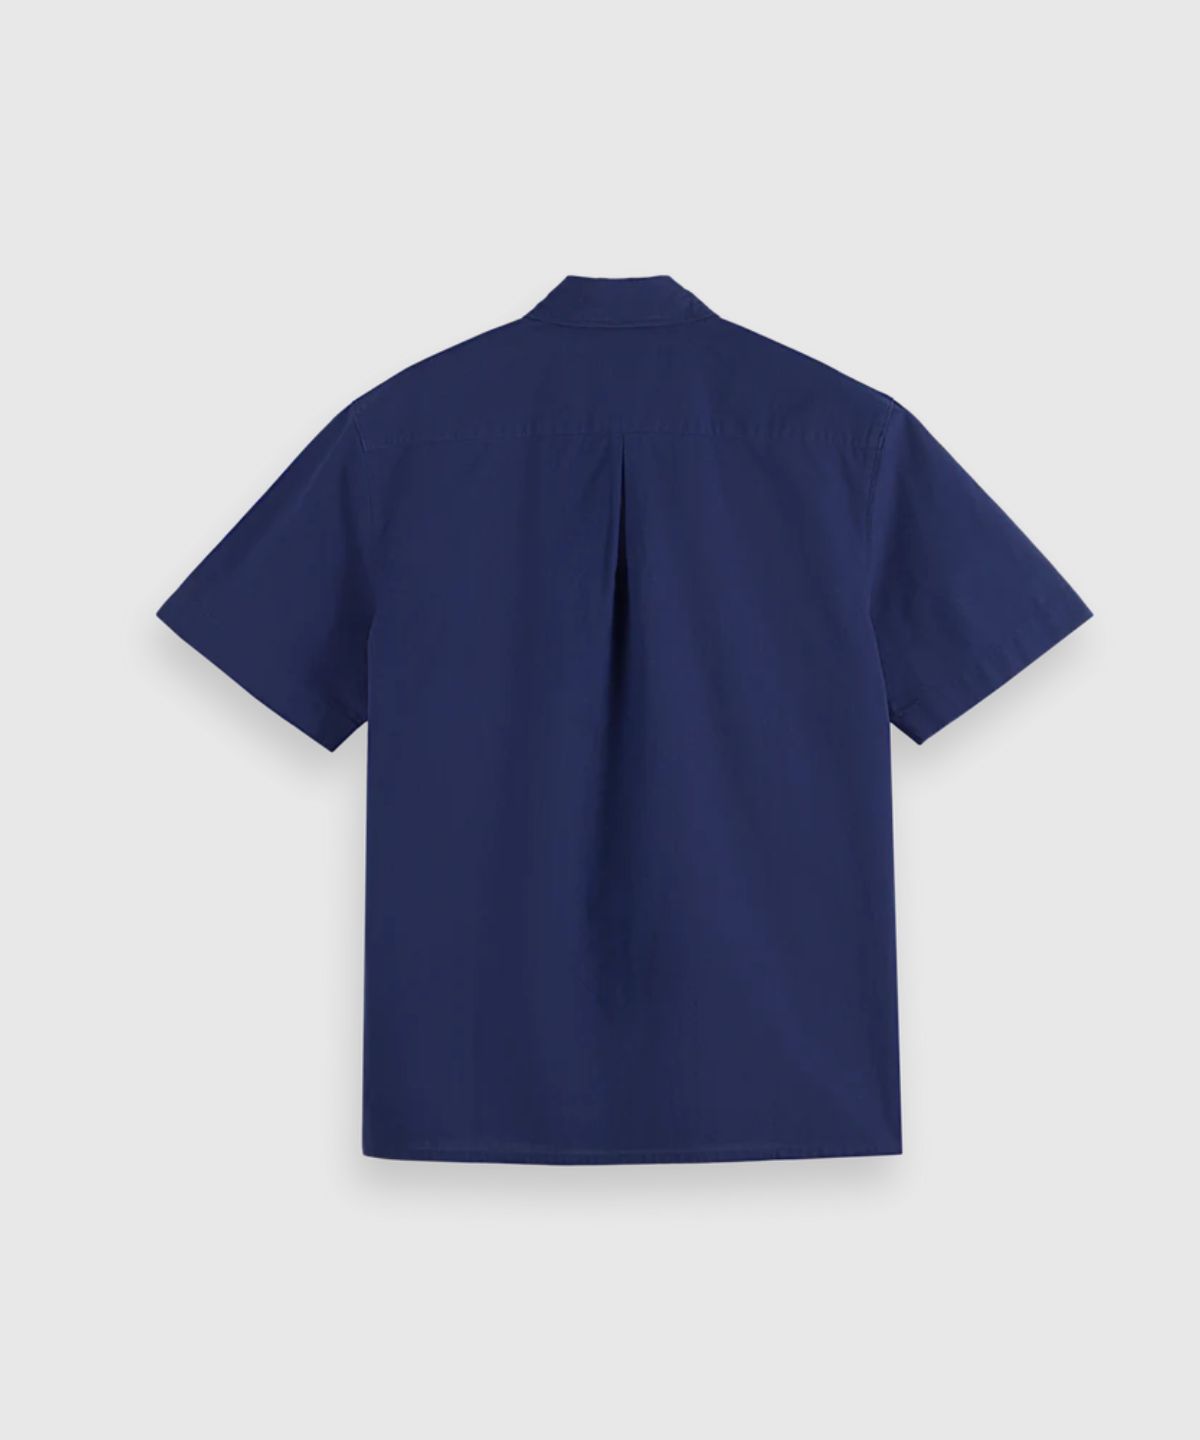 Solid Cotton Shirt